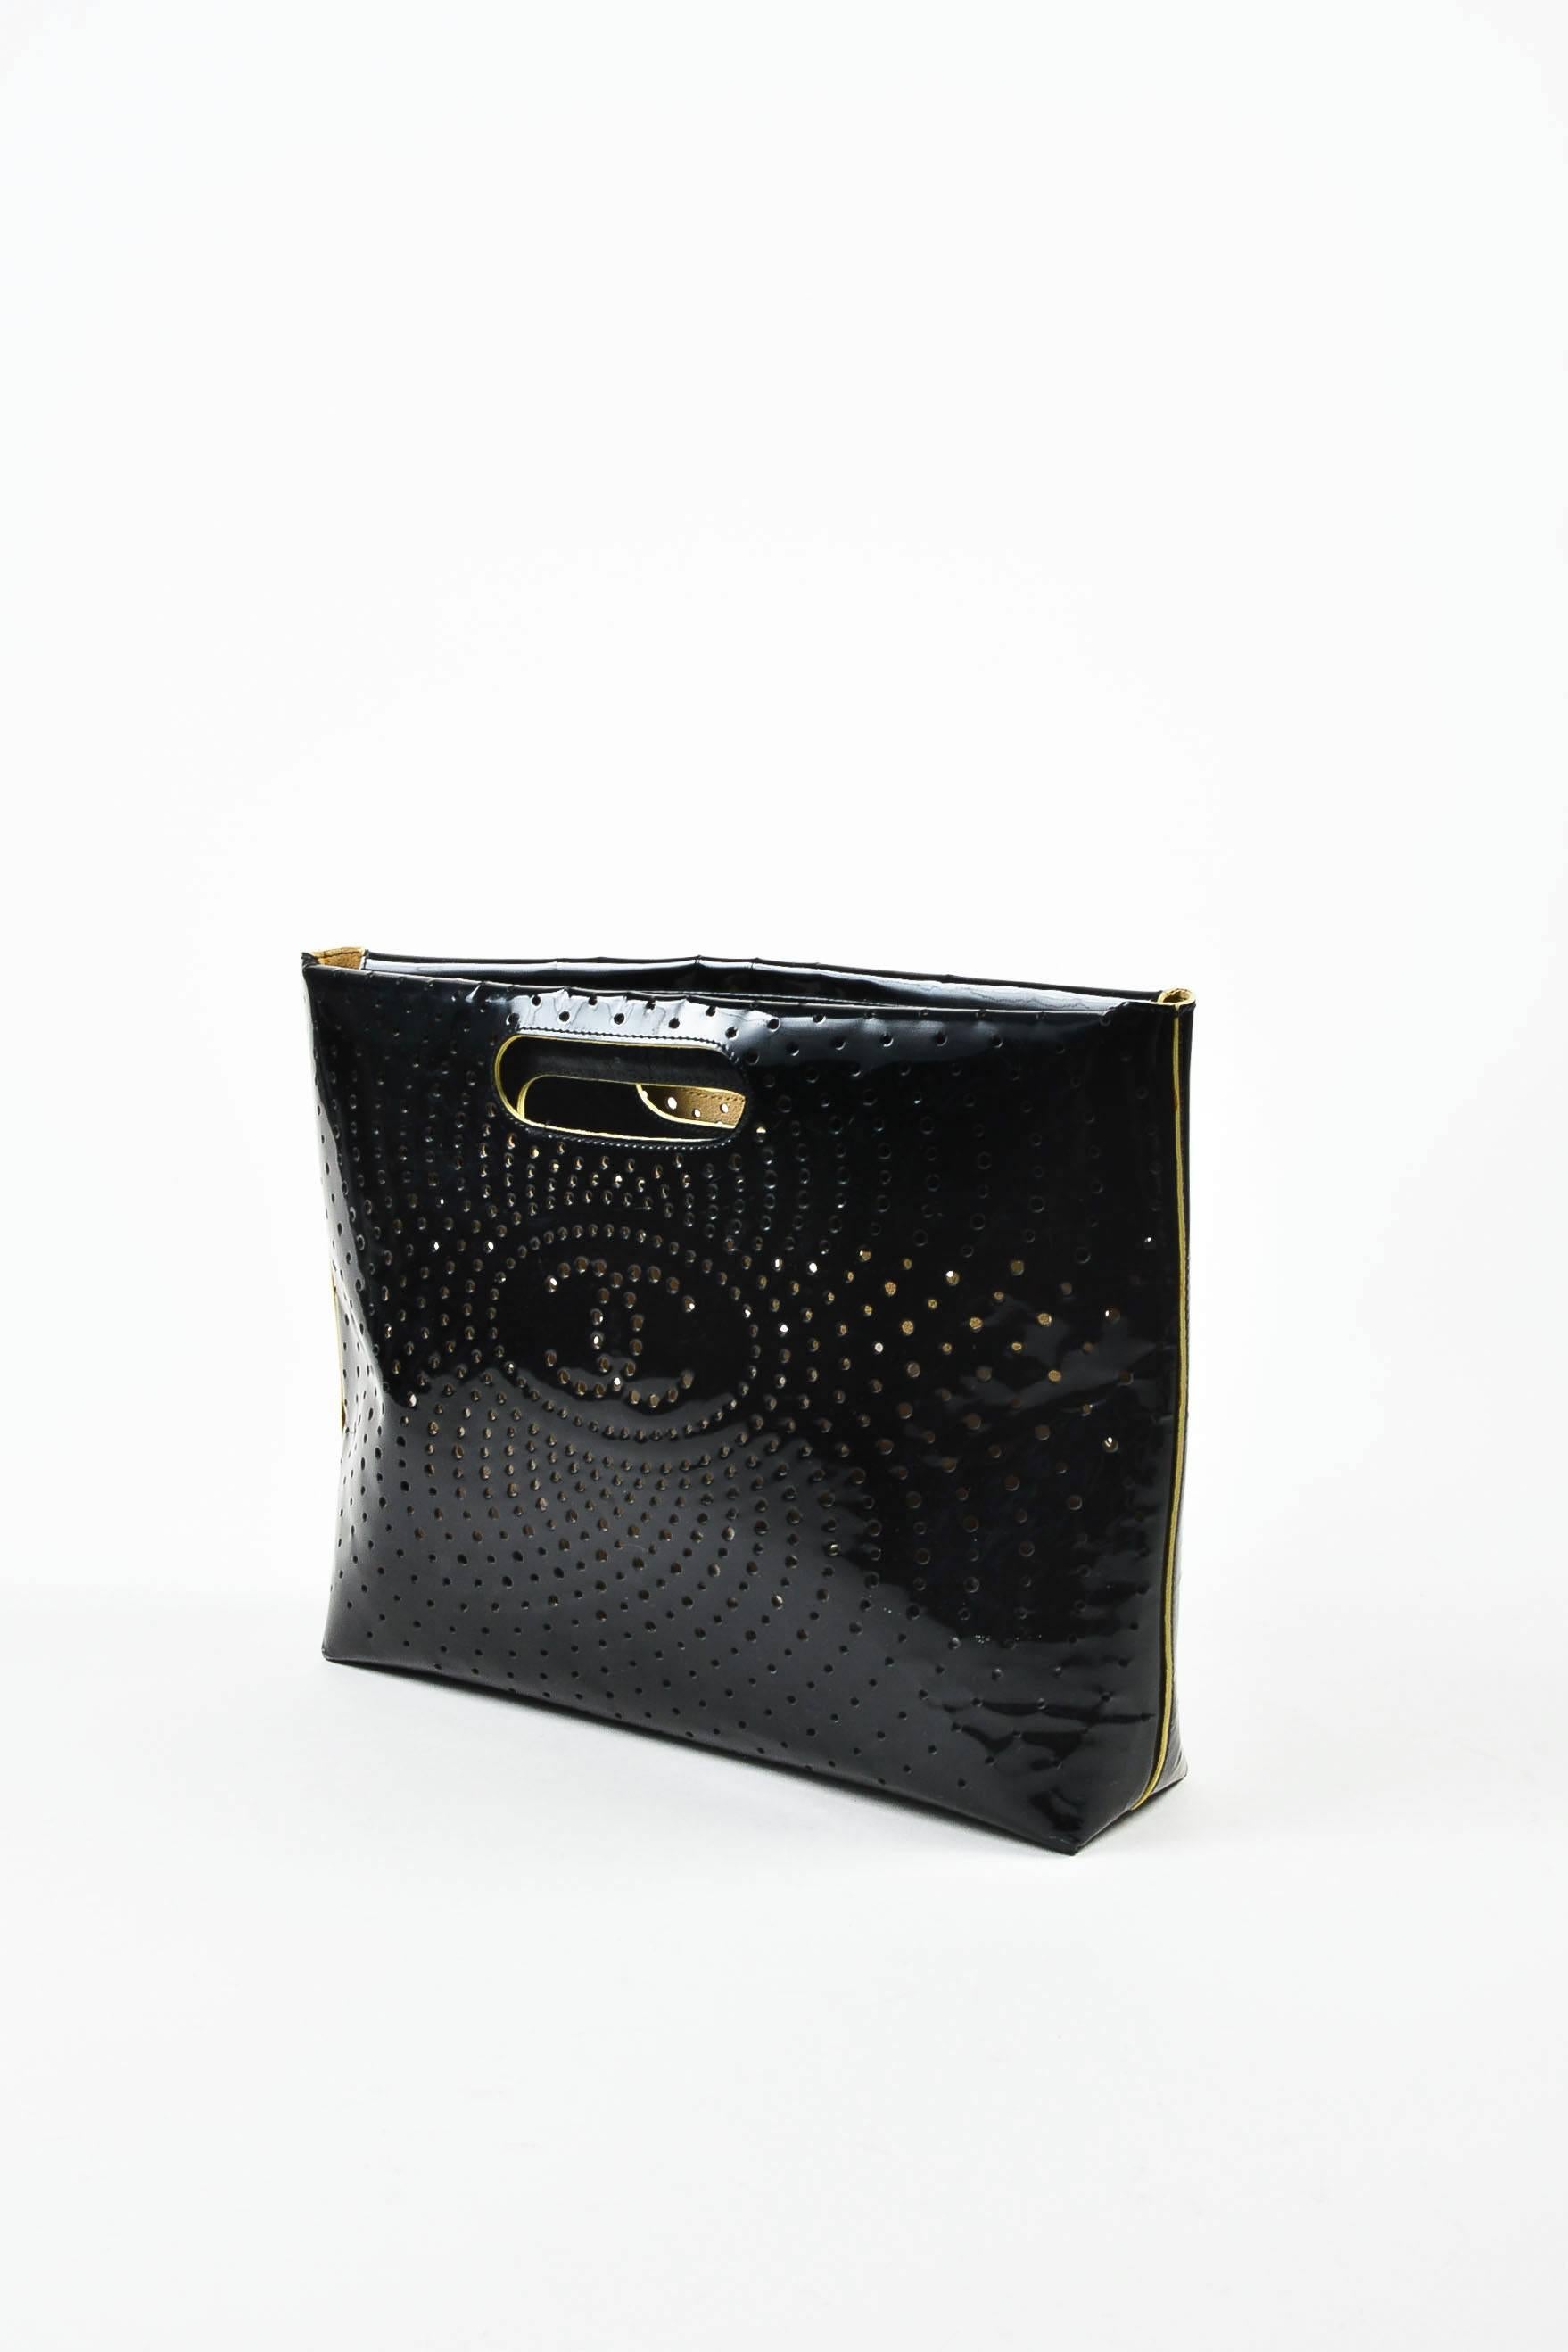 This rectangular shaped clutch handbag by Chanel is constructed of black patent leather. Swirling perforated embellishments throughout with 'CC' logo at the center. Two top handle holes. Bag is open at top. Serial number reads,